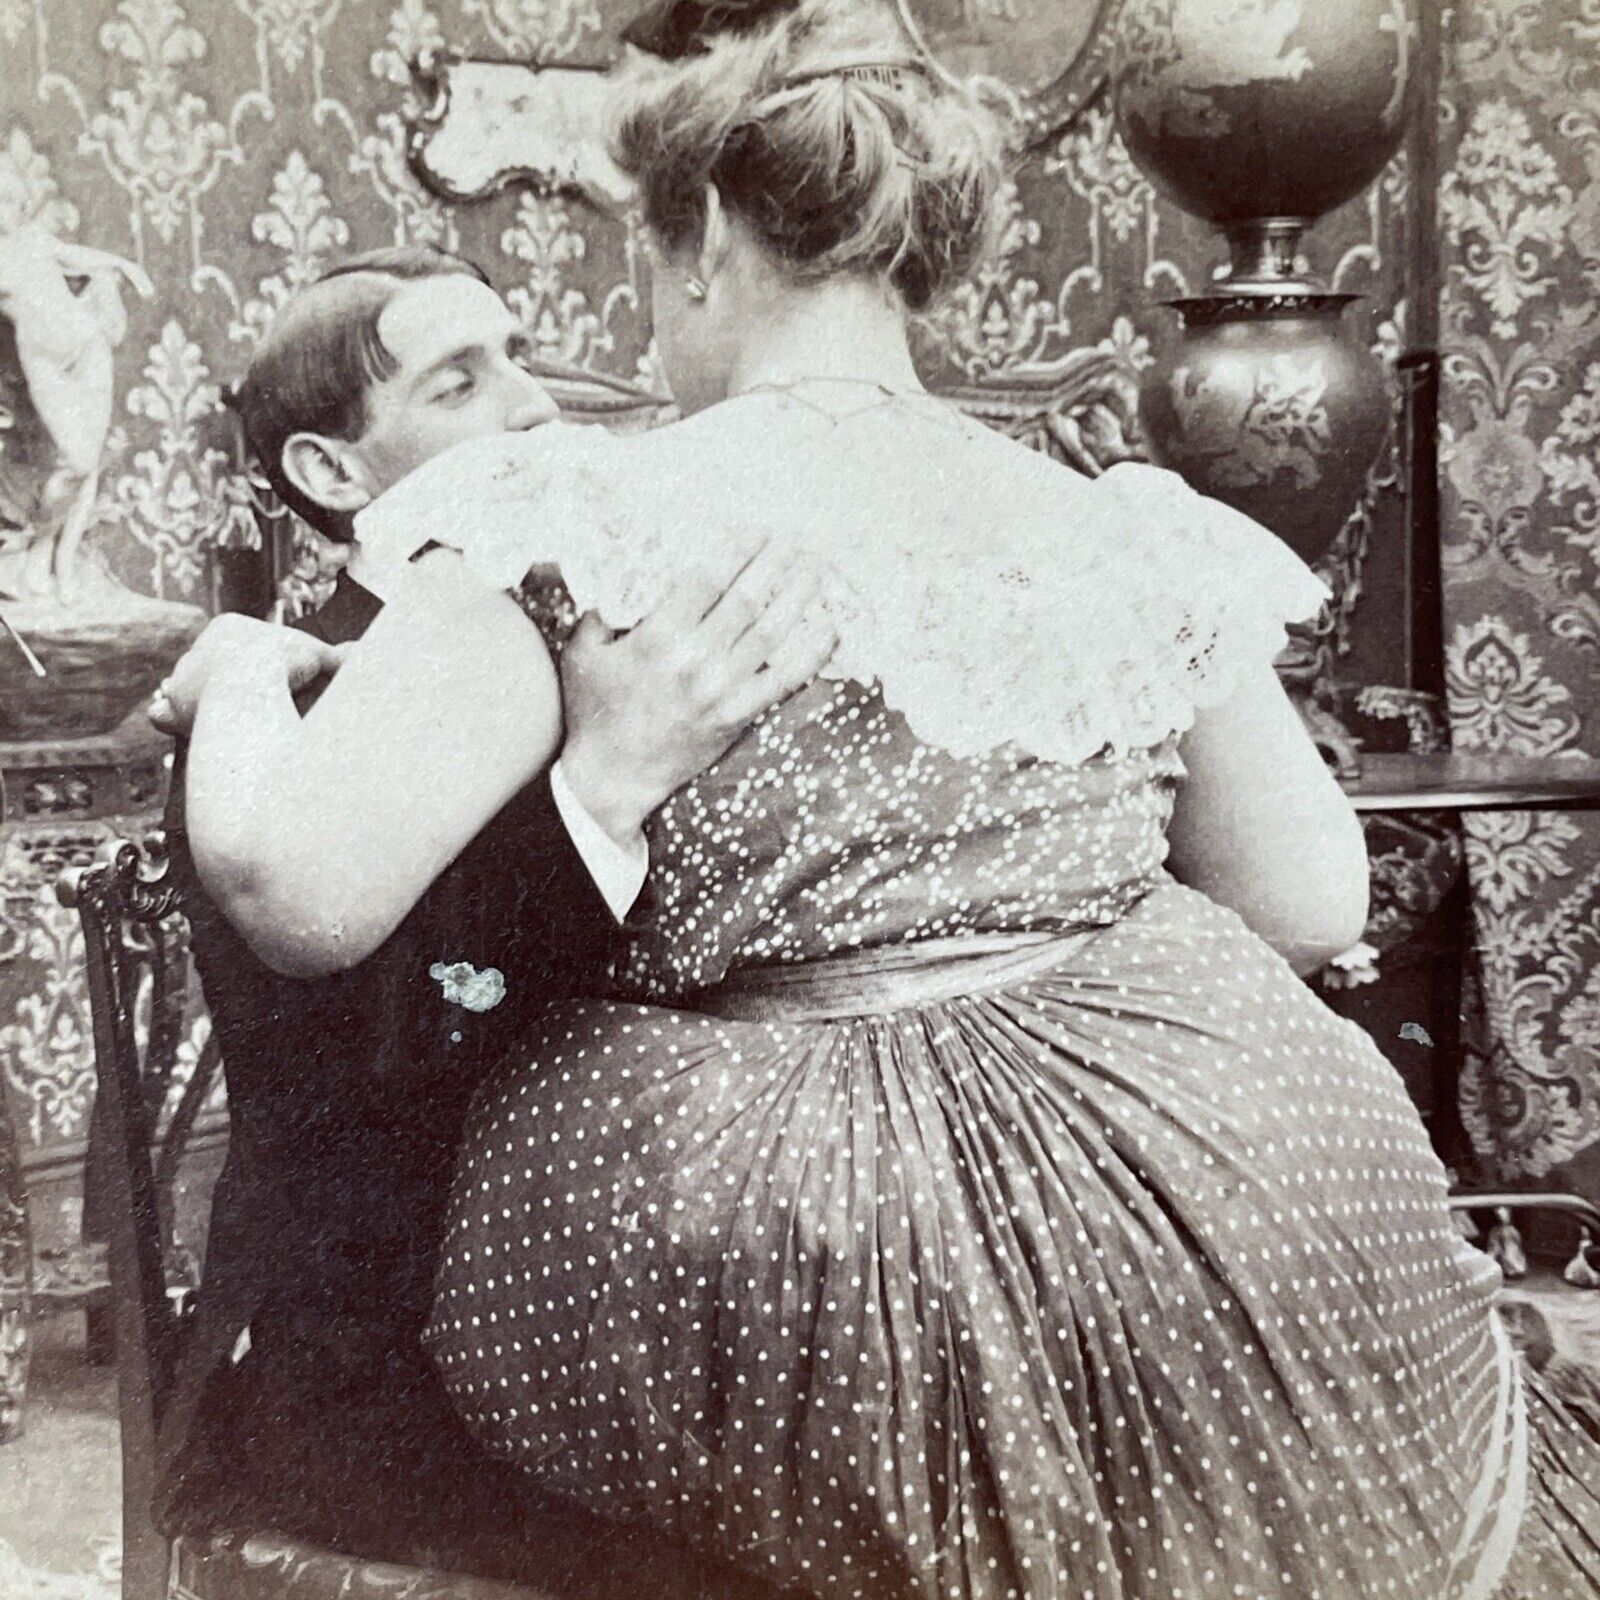 Antique 1901 Larger Woman & Small Man Kissing Stereoview Photo Card V3201